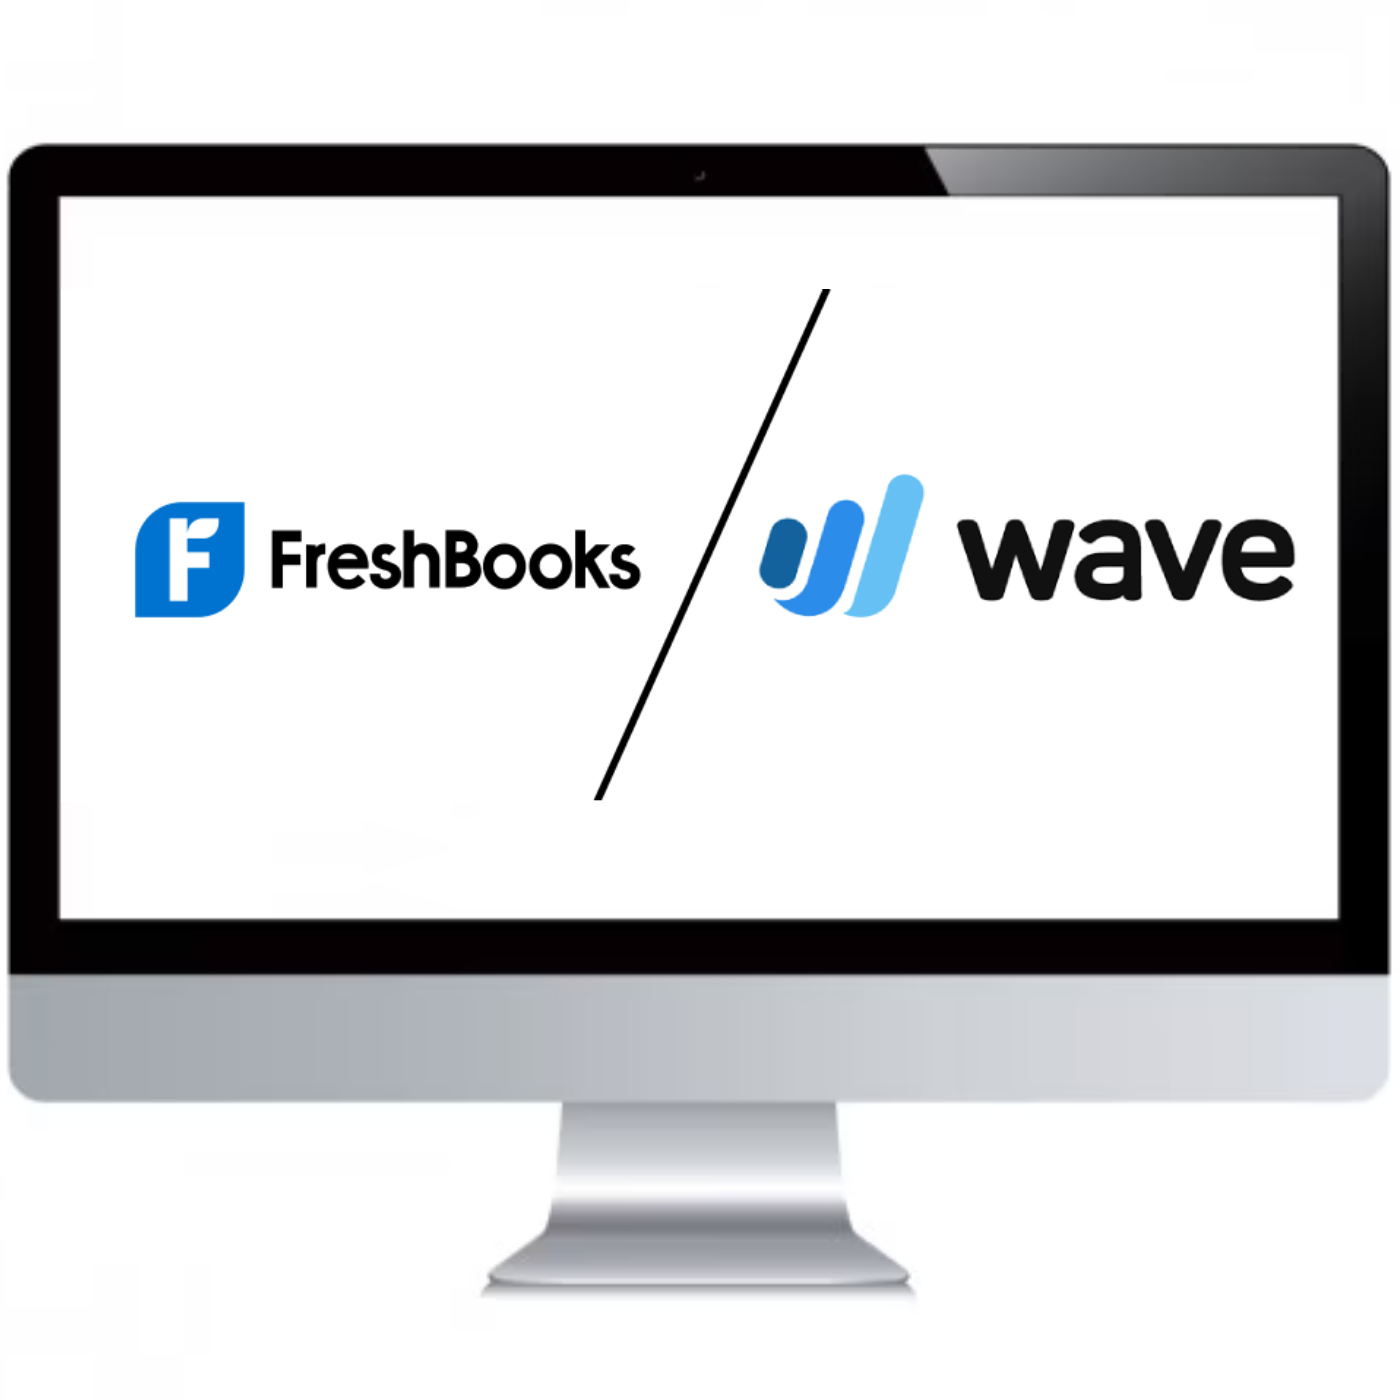 FreshBooks vs Wave: Comparing Two Popular Accounting Software Solutions